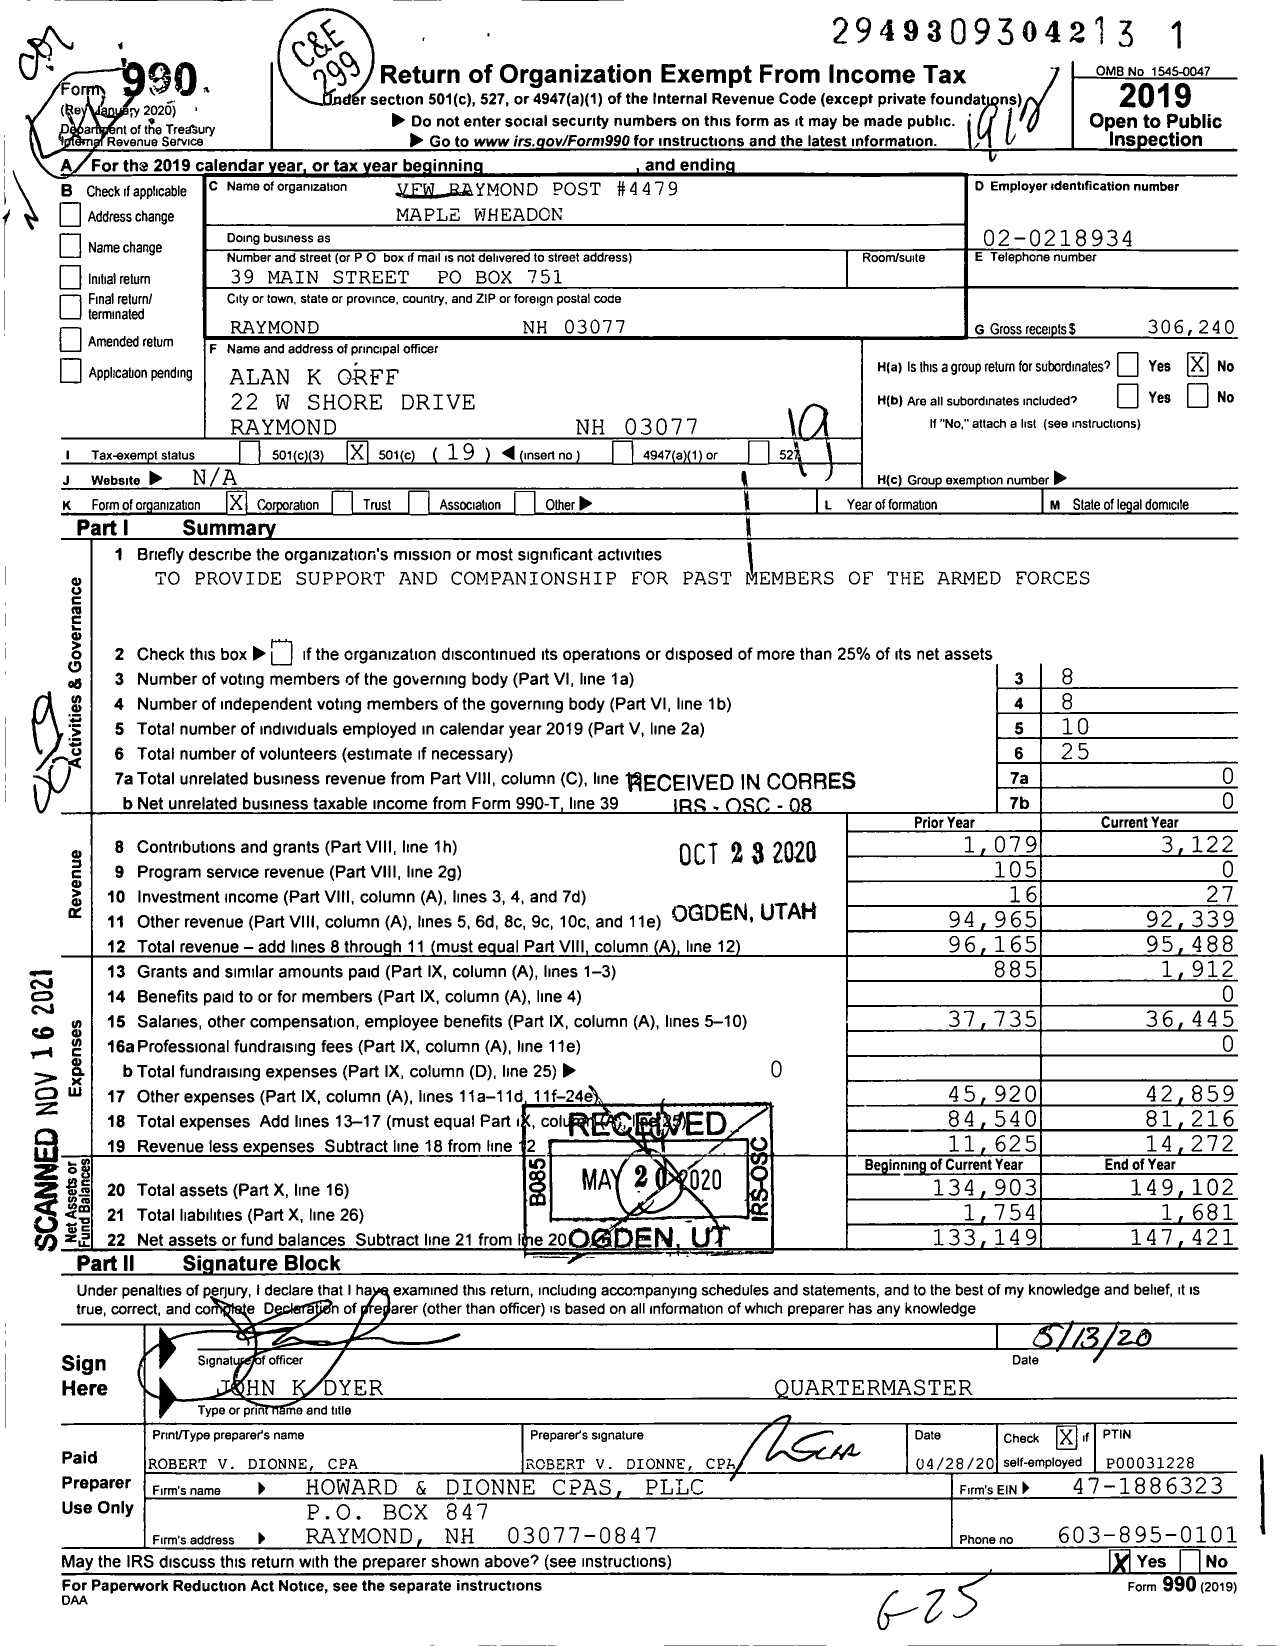 Image of first page of 2019 Form 990O for Veterans of Foreign Wars Department of New Hampshire - VFW Raymond Post 4479 Maple Wheadon